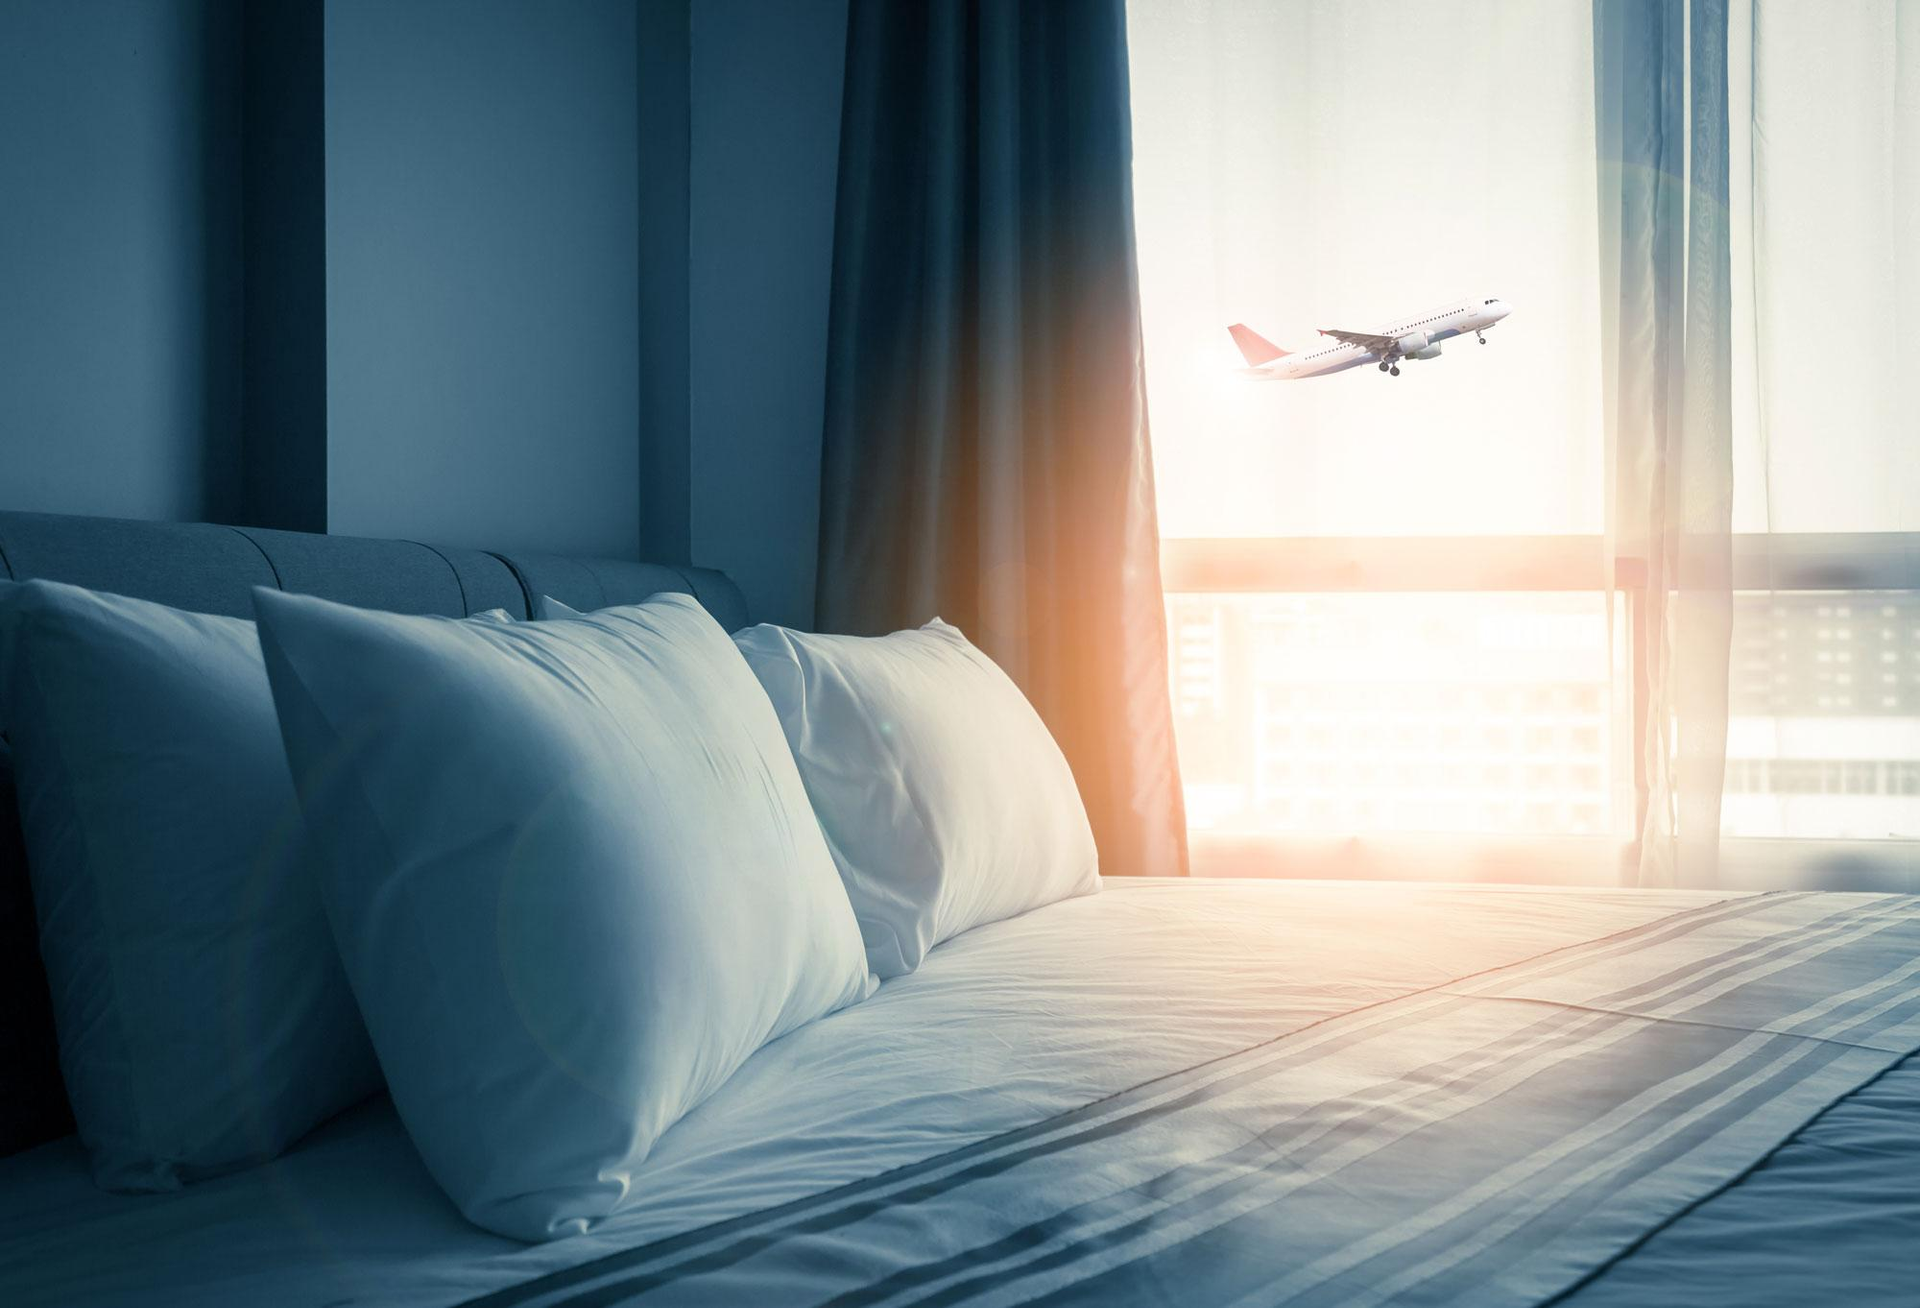 Teachers and school employees get exclusive education discounts on hotels, airport parking, and travel from Park Sleep Fly